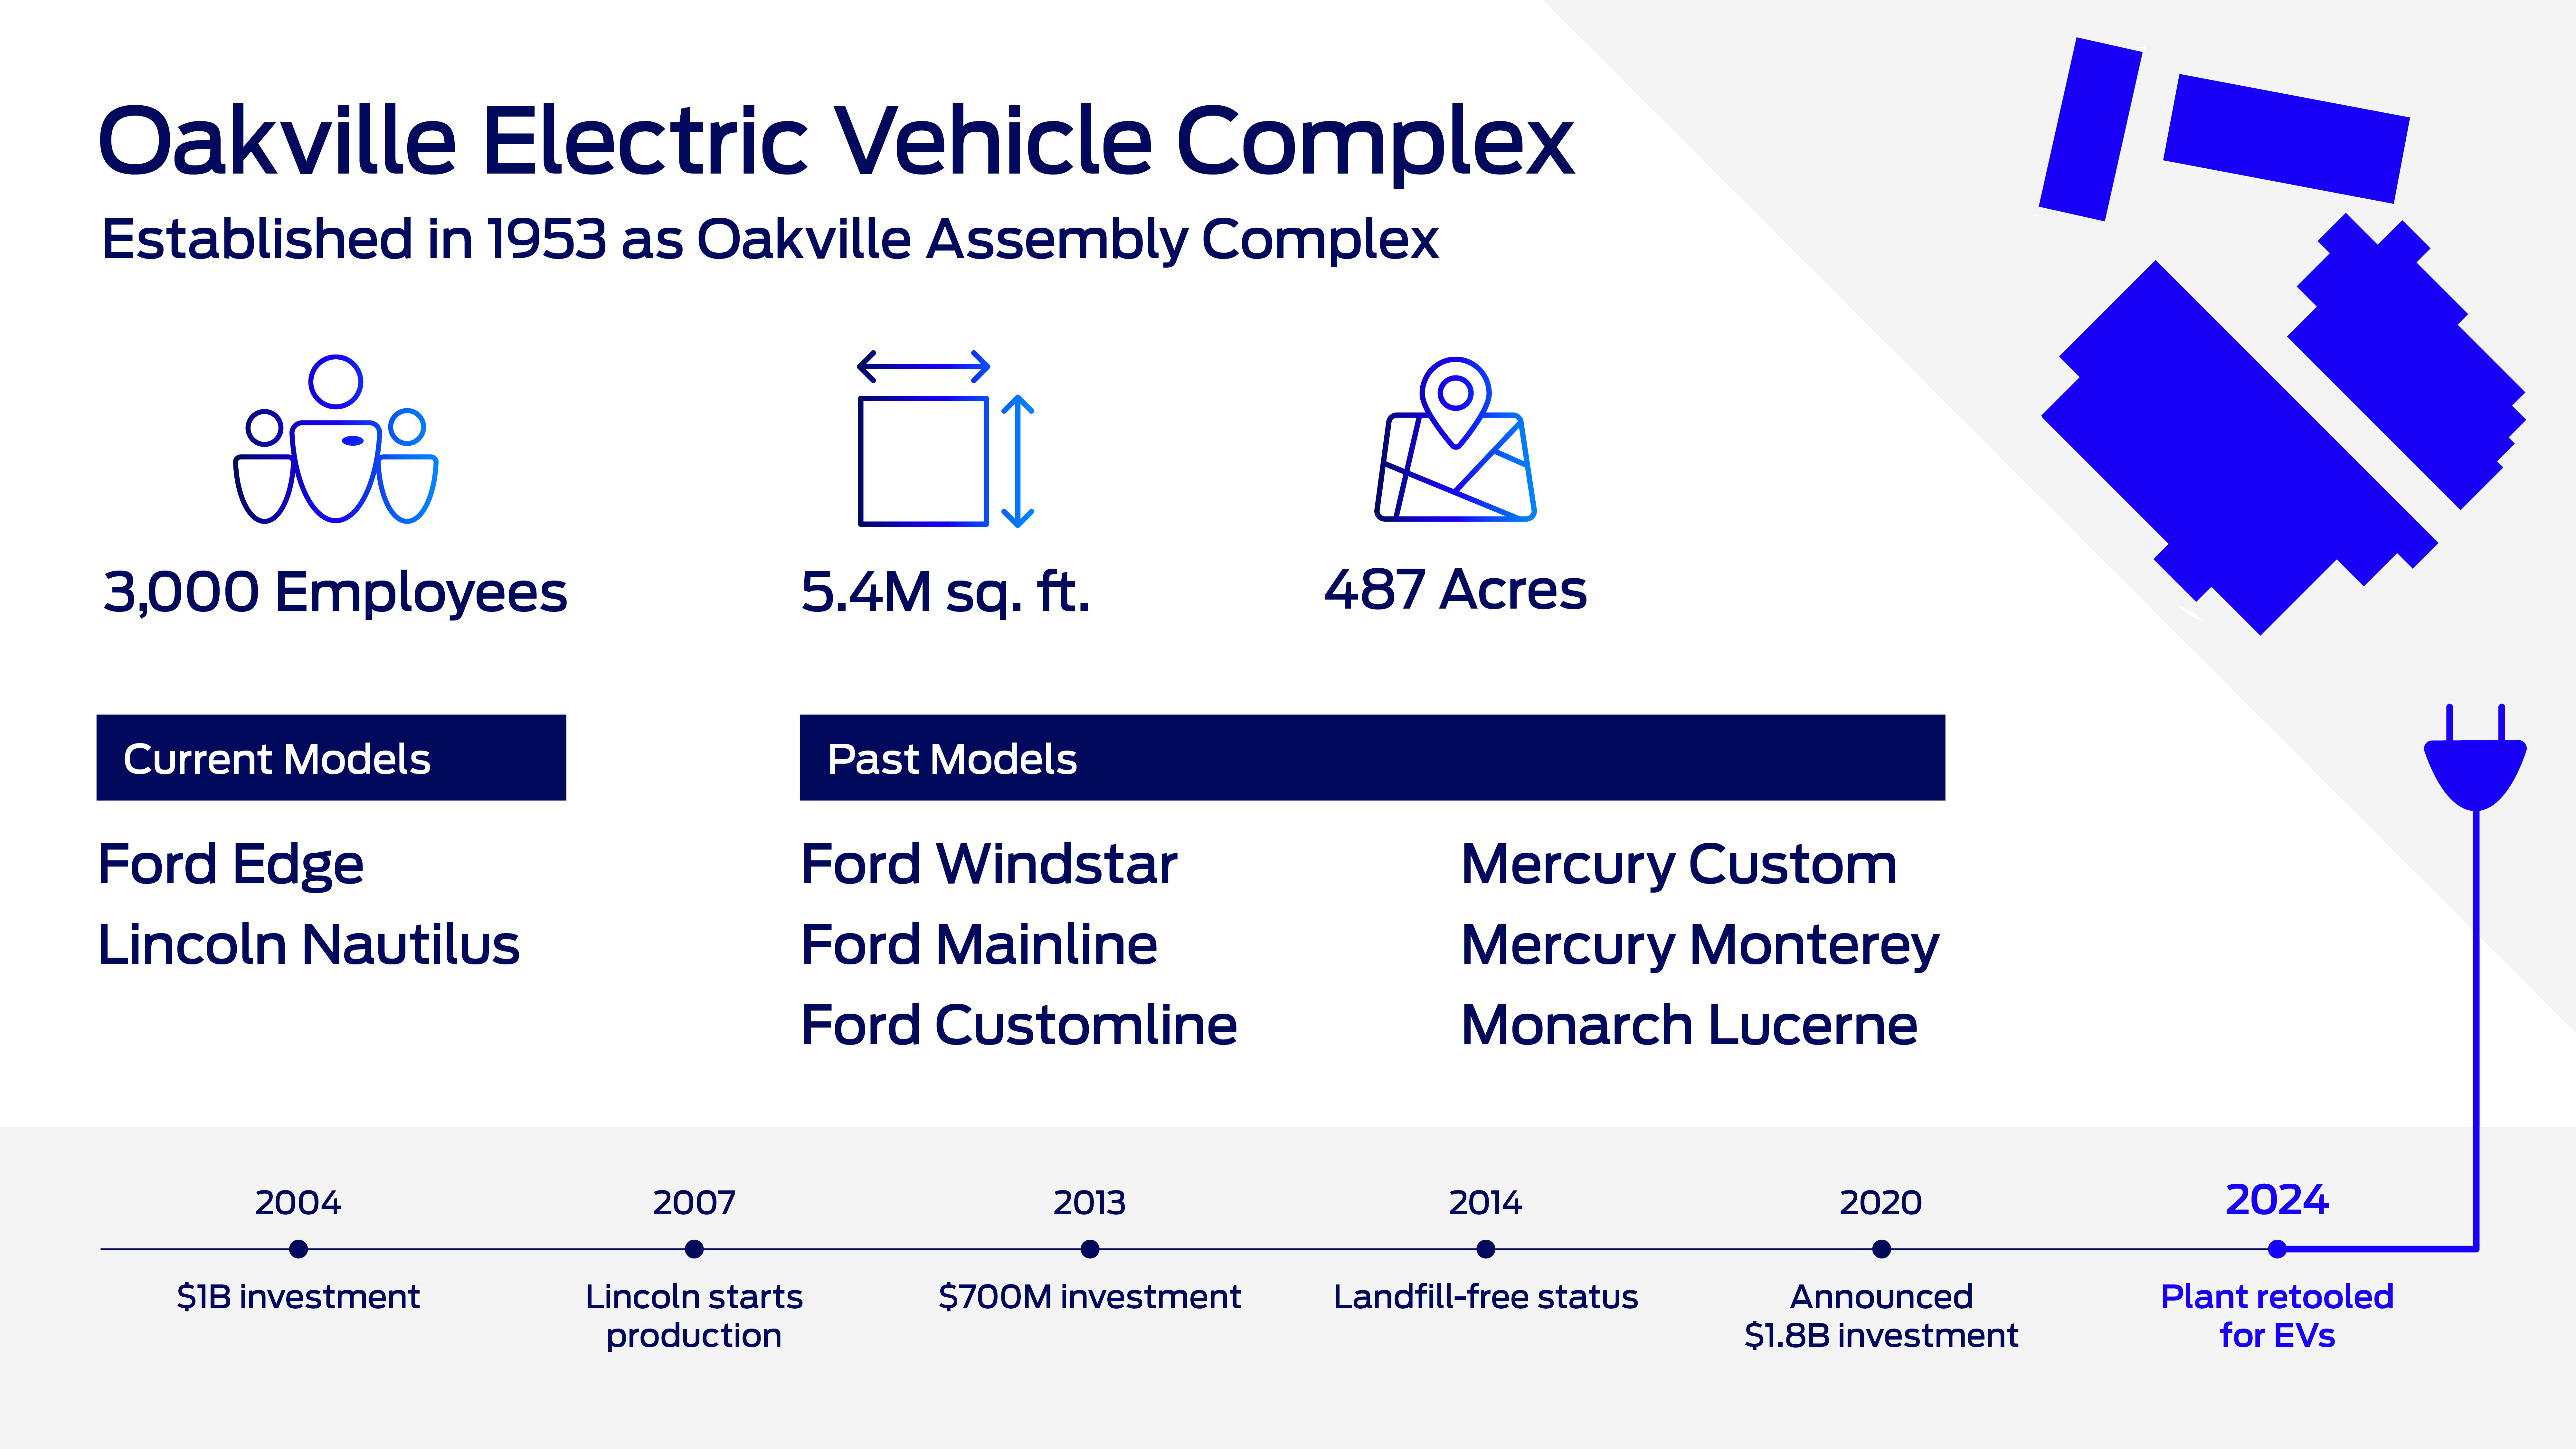 Ford's Oakville Electric Vehicle Complex will begin to retool and modernize in the second quarter of 2024 to prepare for production of next-generation EVs. This marks the first time a full-line automaker has announced plans to produce passenger EVs in Canada for the North American market.